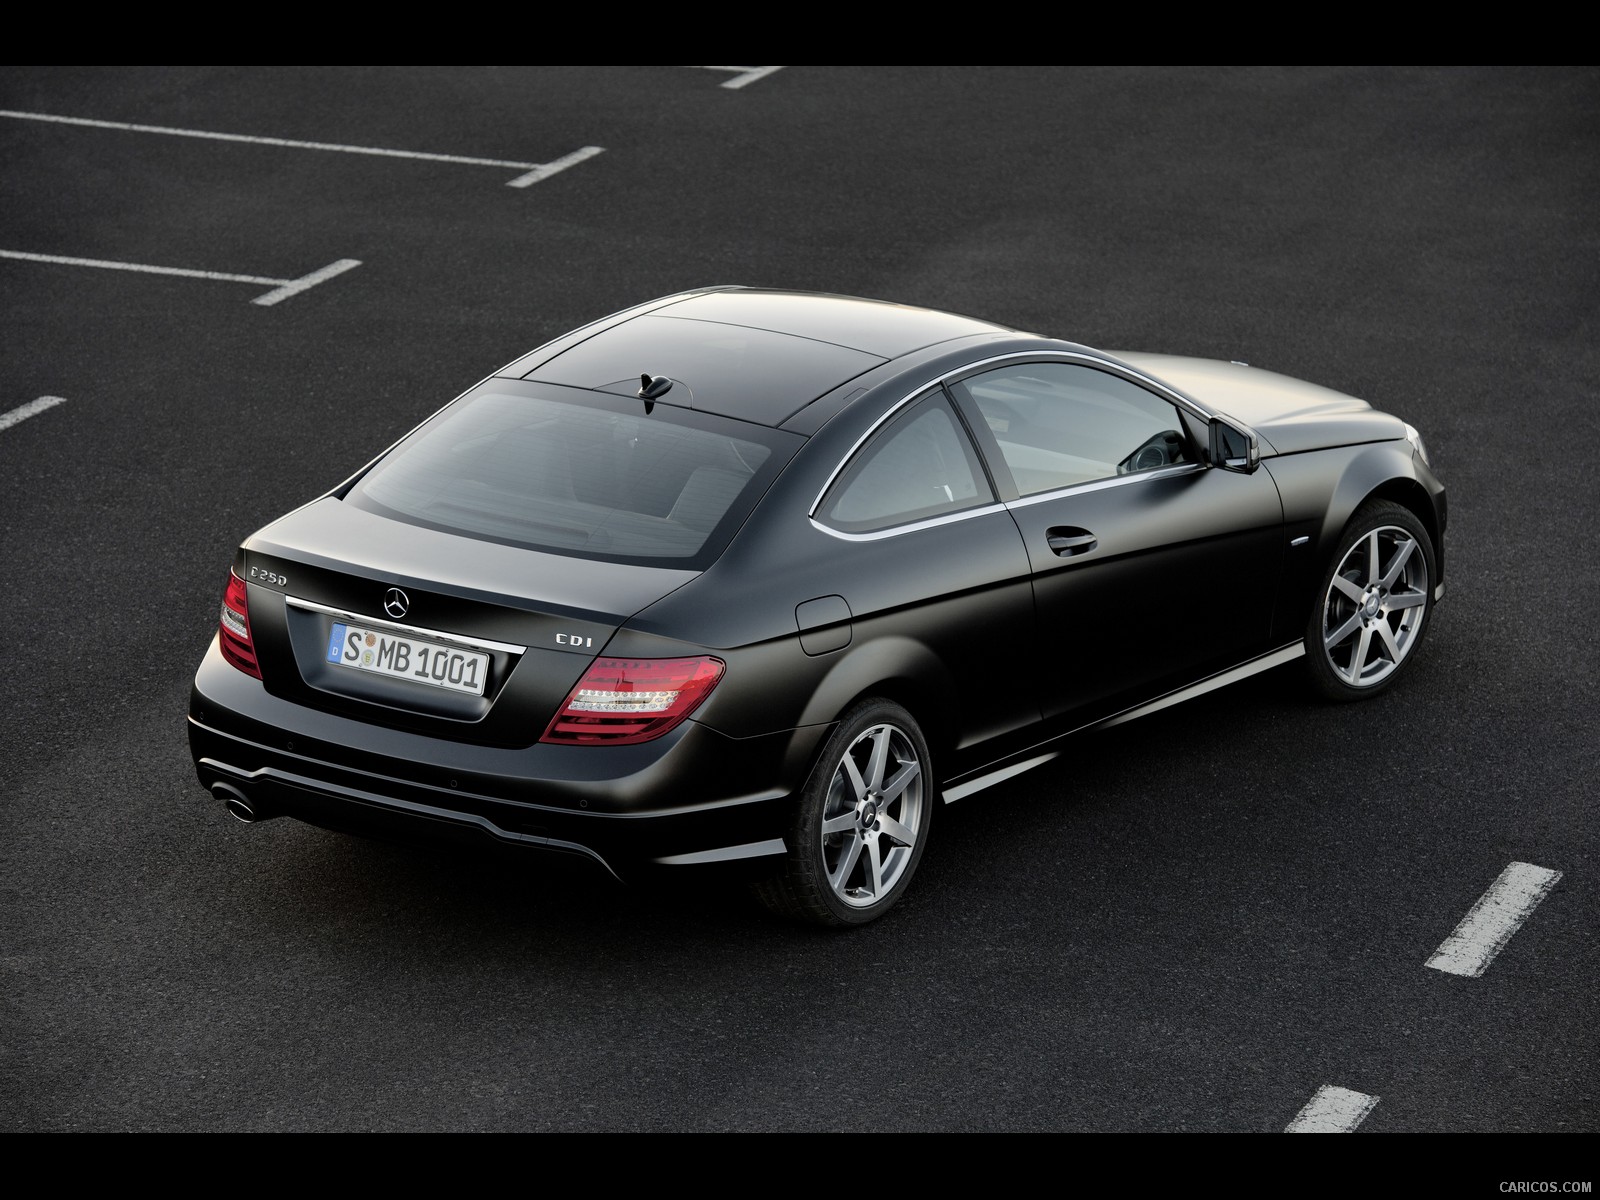 Mercedes-Benz C-Class Coupe (2012)  - Rear , #10 of 79